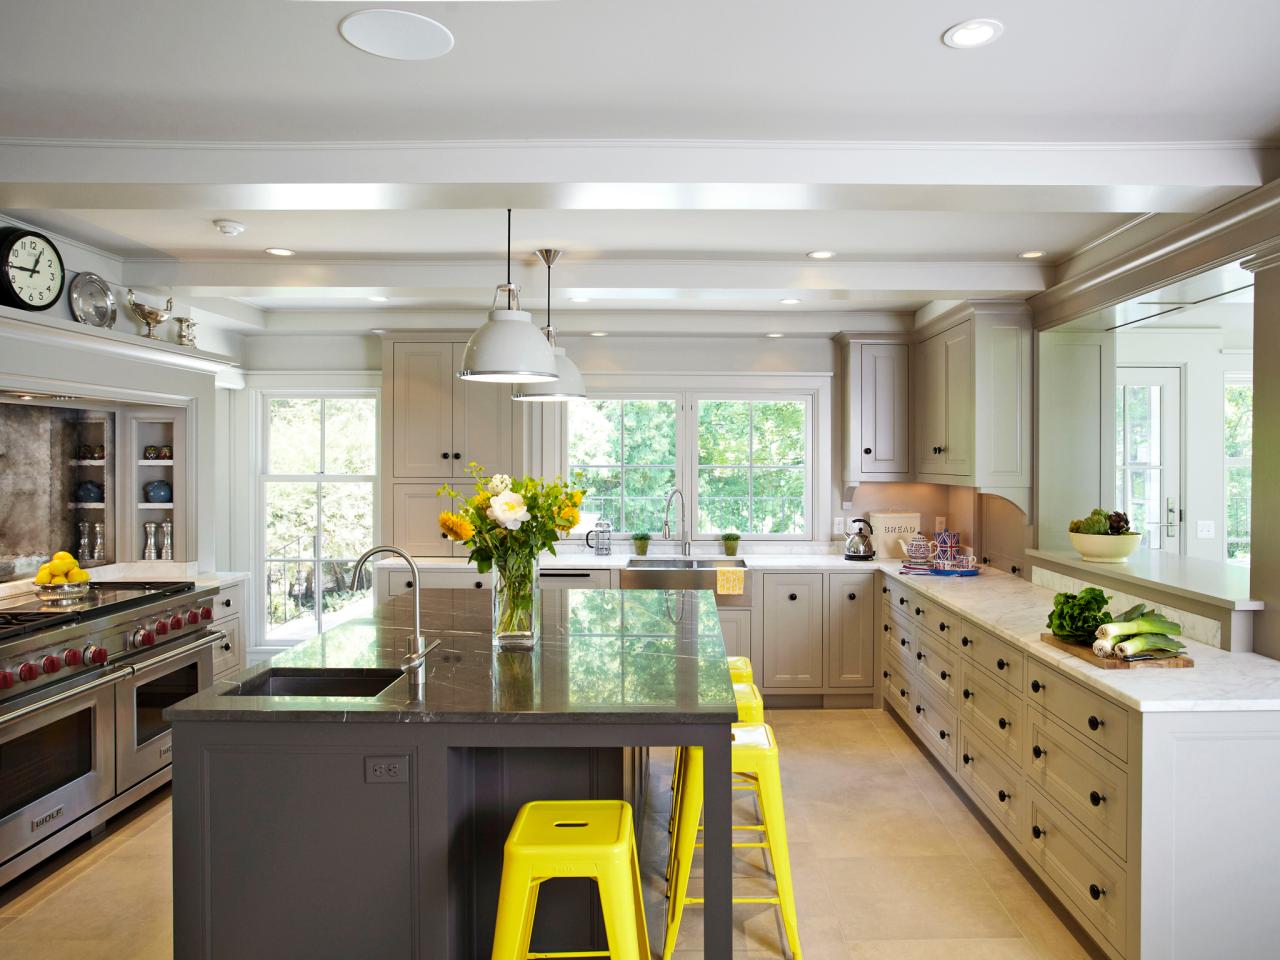 15+ Design Ideas for Kitchens Without Upper Cabinets | Kitchen Ideas